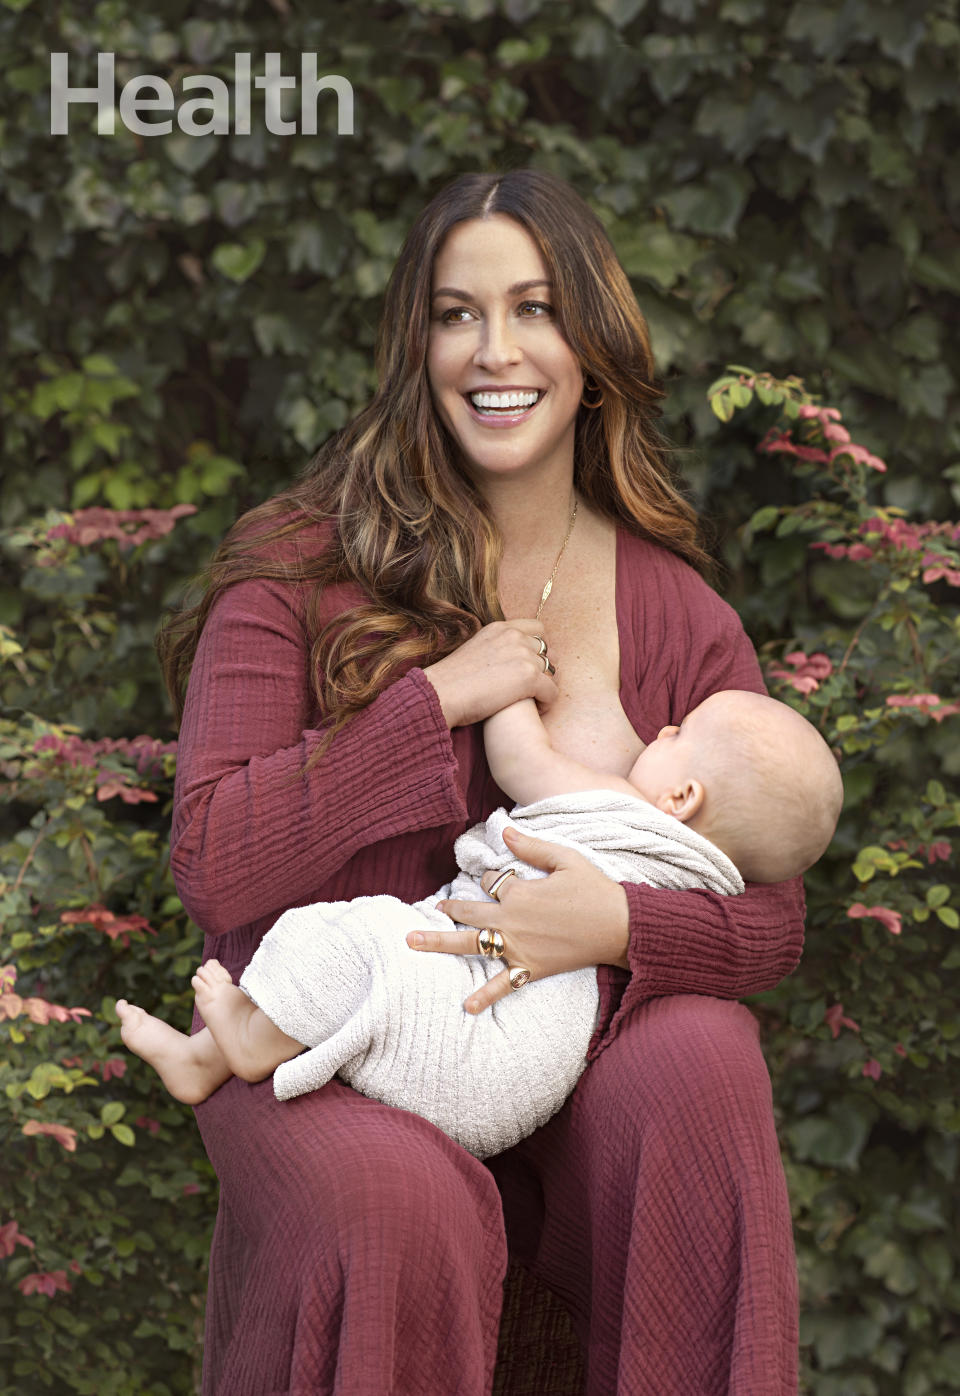 Morissette breastfeeds son, Winter, on the cover of "Health" for the May issue, on sale April 10th. (Photo: Kayt Johns)